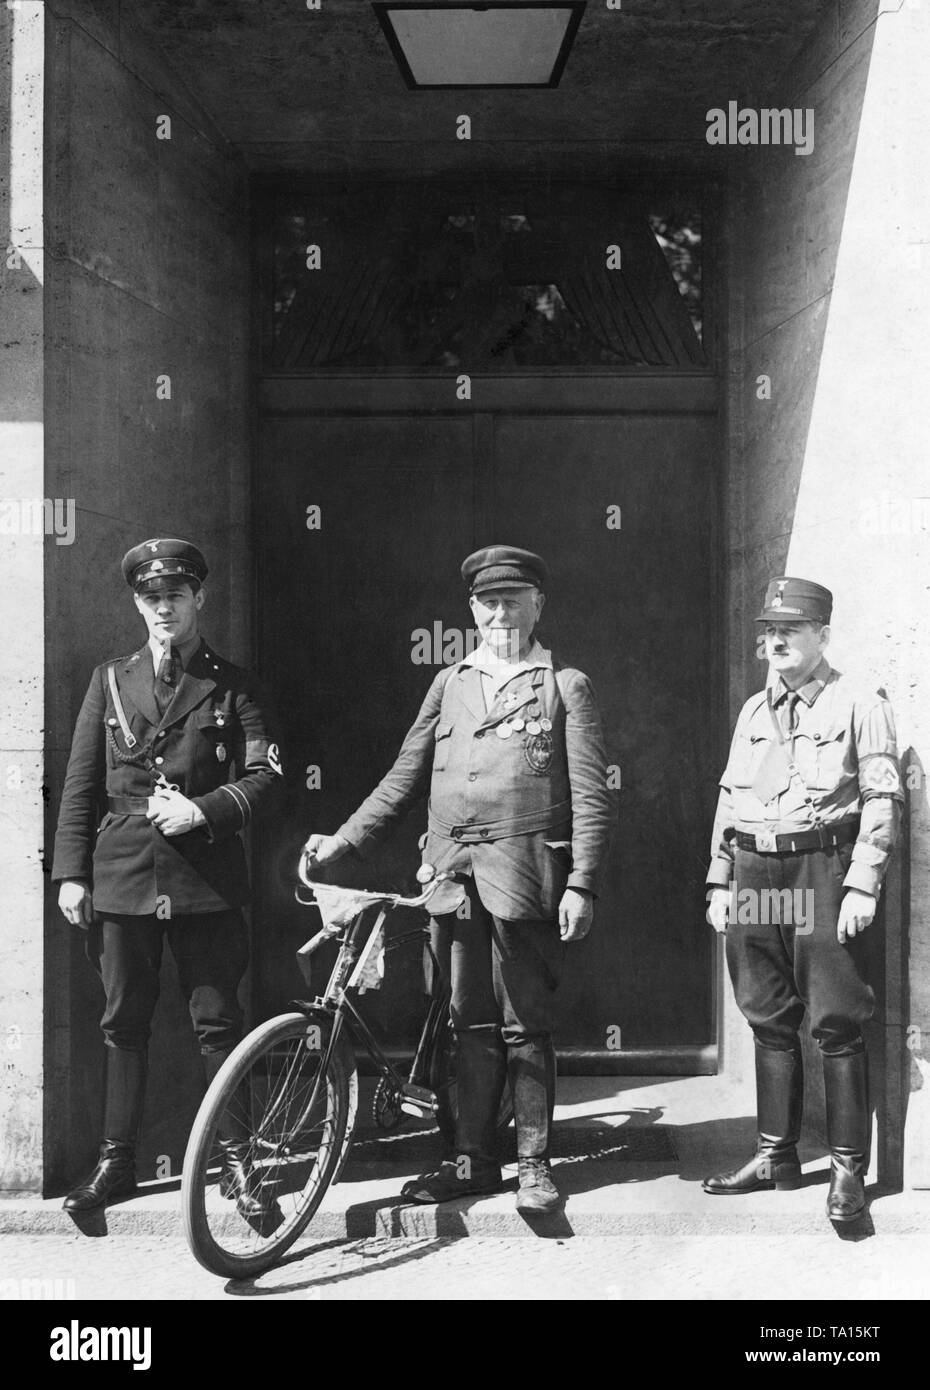 The oldest active cyclist, the retired railway official Heinrich Werner from Heidenburg, 84 years old, is photographed in front of the entrance to the Berlin Radio House. Characteristic of this time, shortly after Hitler's takeover, two SS guards stand before the entrance. Stock Photo